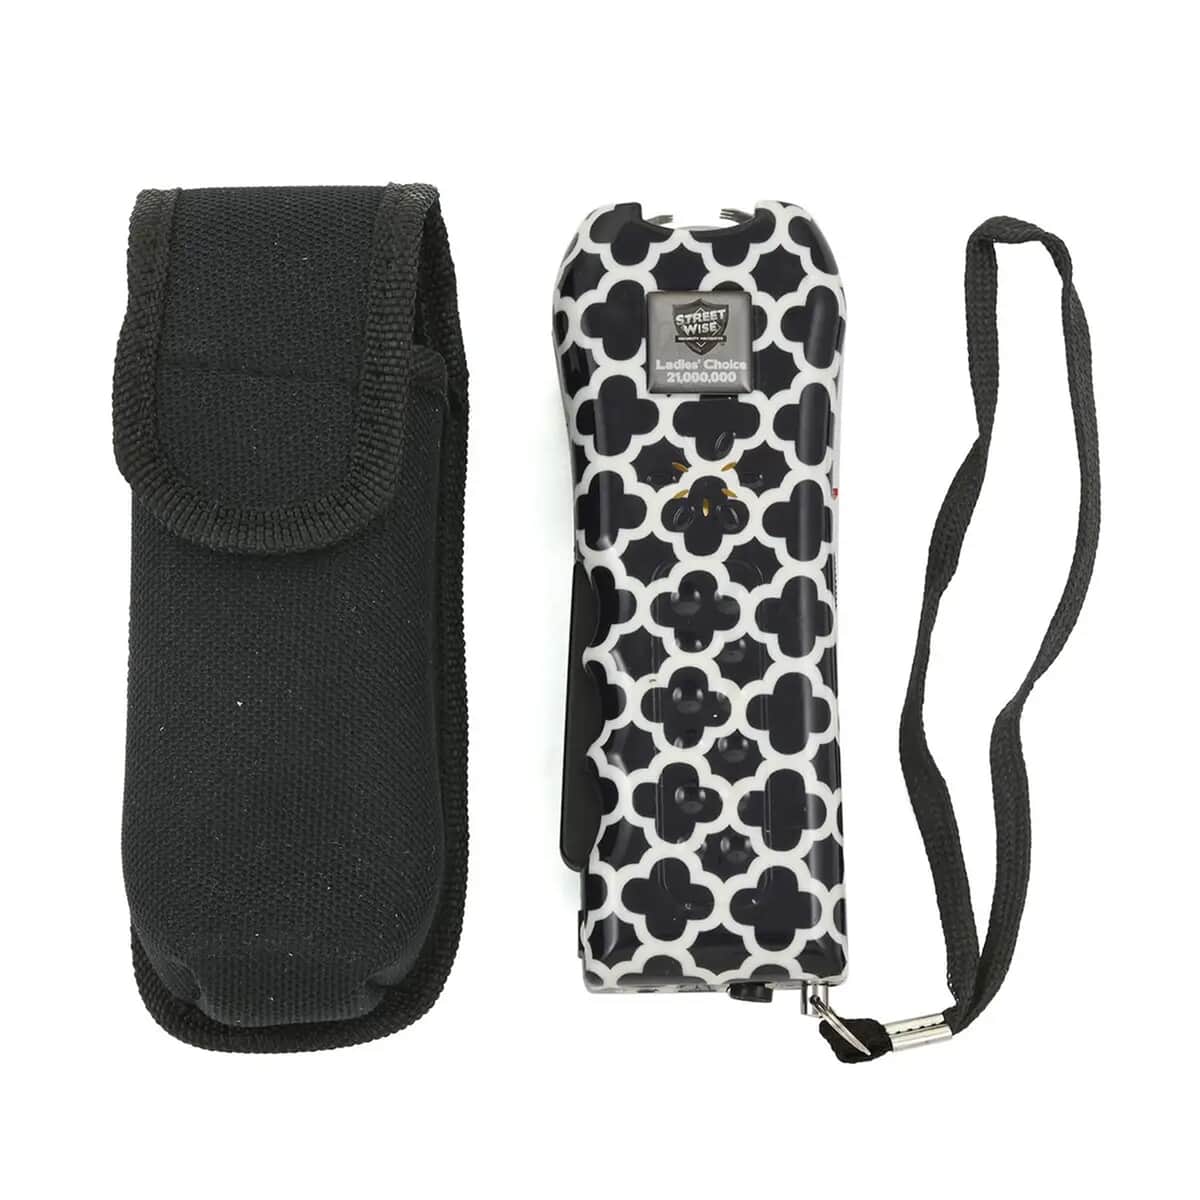 Streetwise Navy and White Moroccan Pattern Stun Gun with Flash Light, Alarm and Carry Case (5x1.5) image number 0